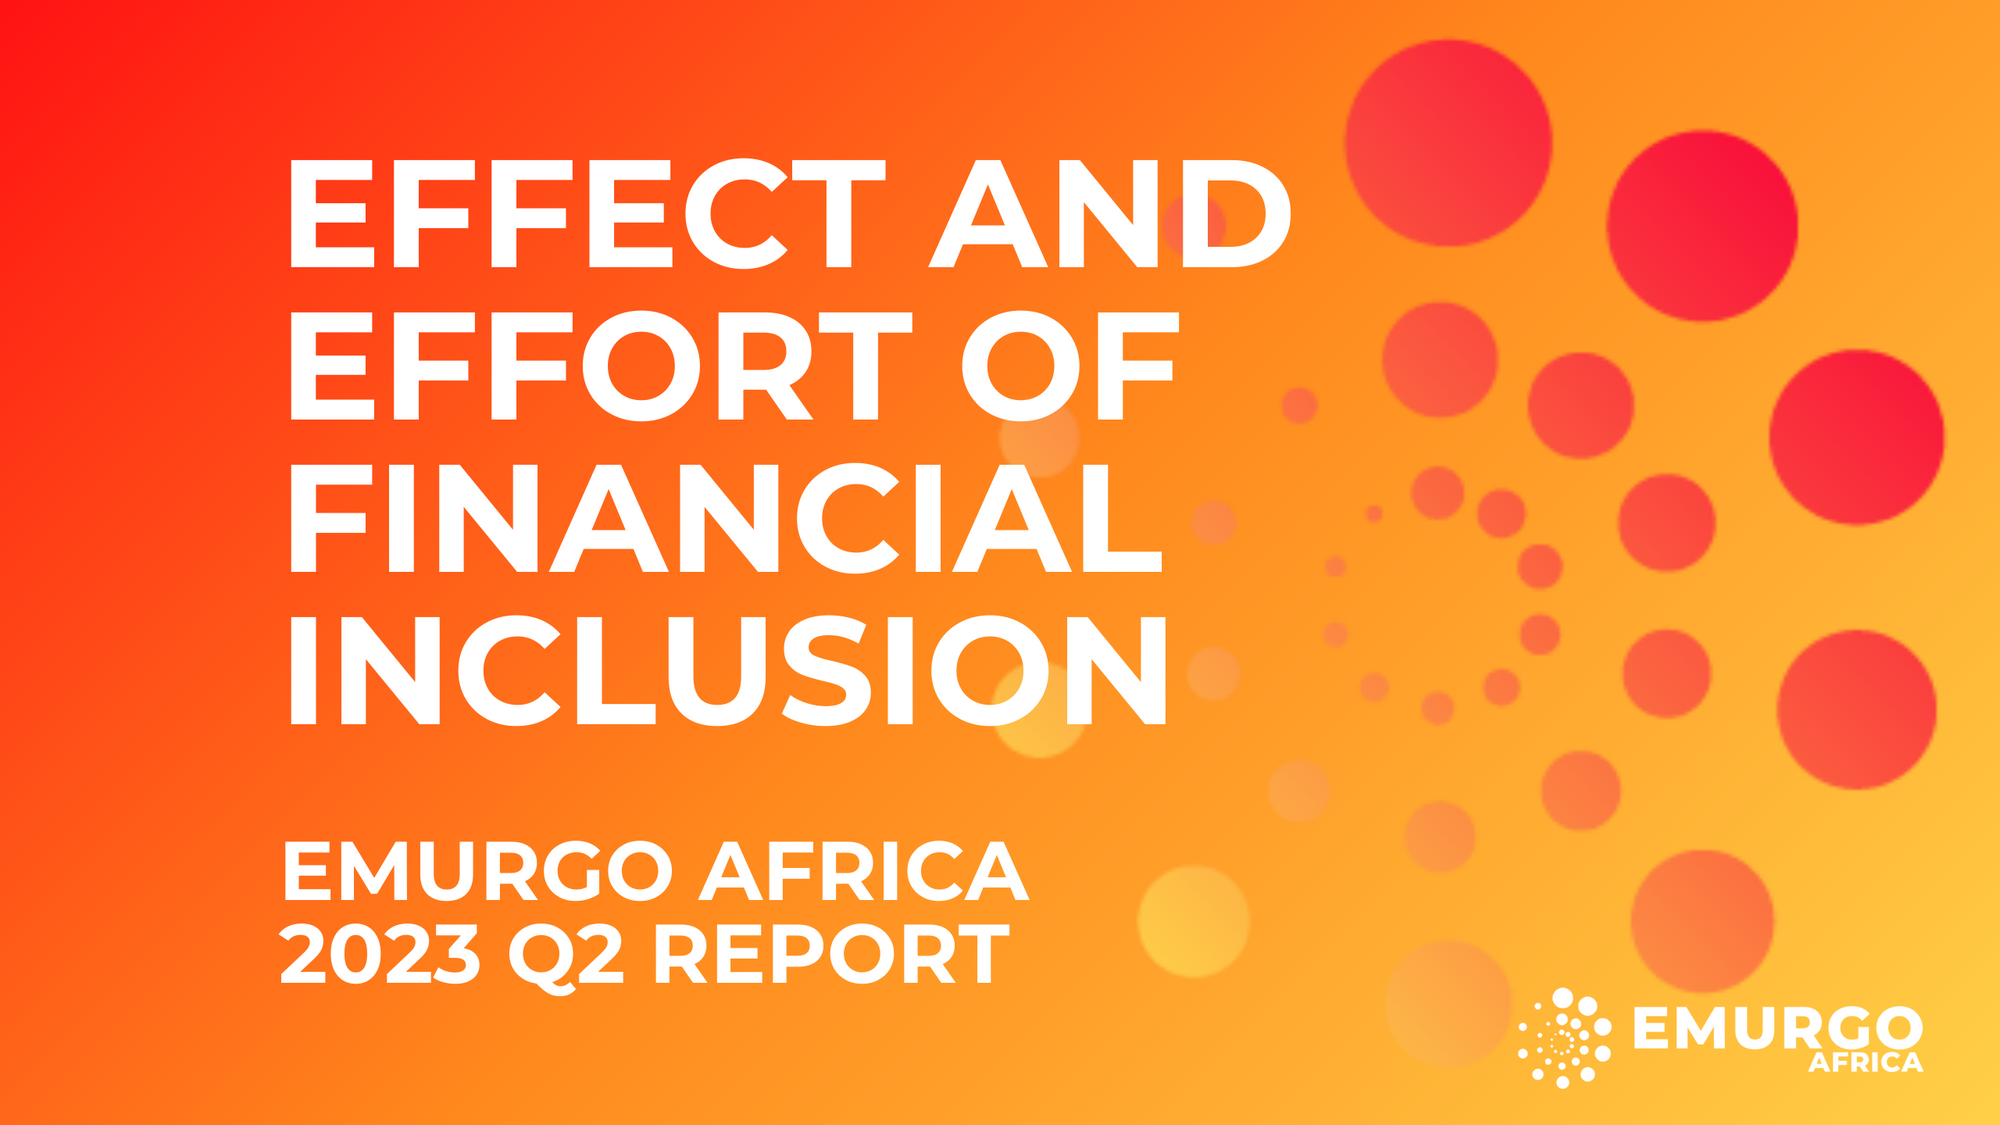 EMURGO Africa 2023 Q2 Report: Effect and Effort of Financial Inclusion